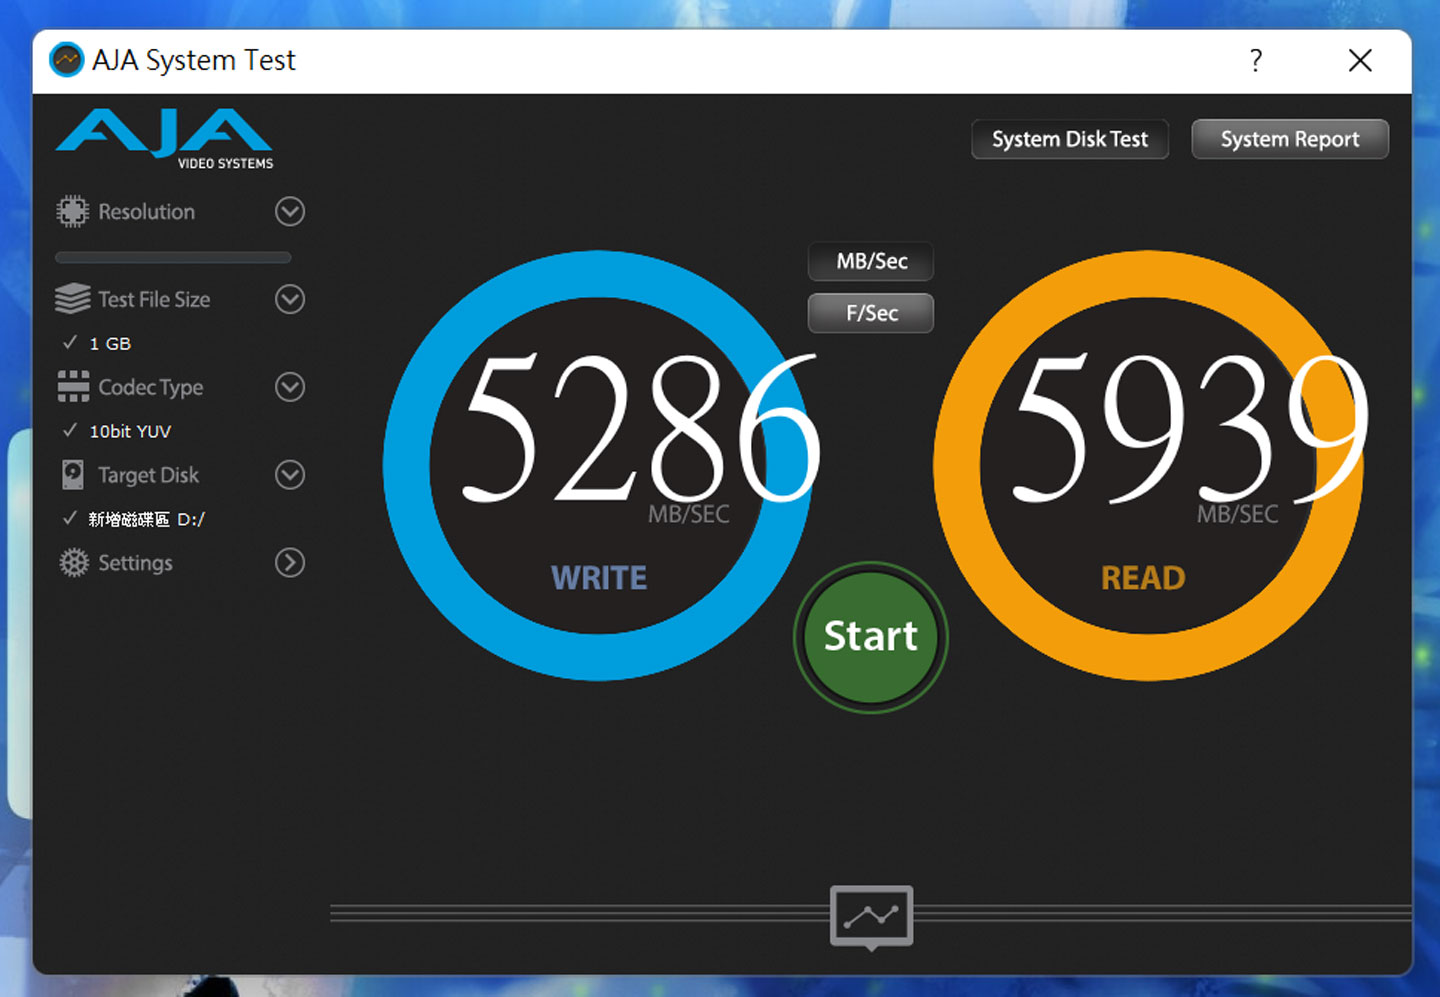 Through the AJA System Test, the results of reading 5939 MB/s and writing 5286 MB/s were obtained.